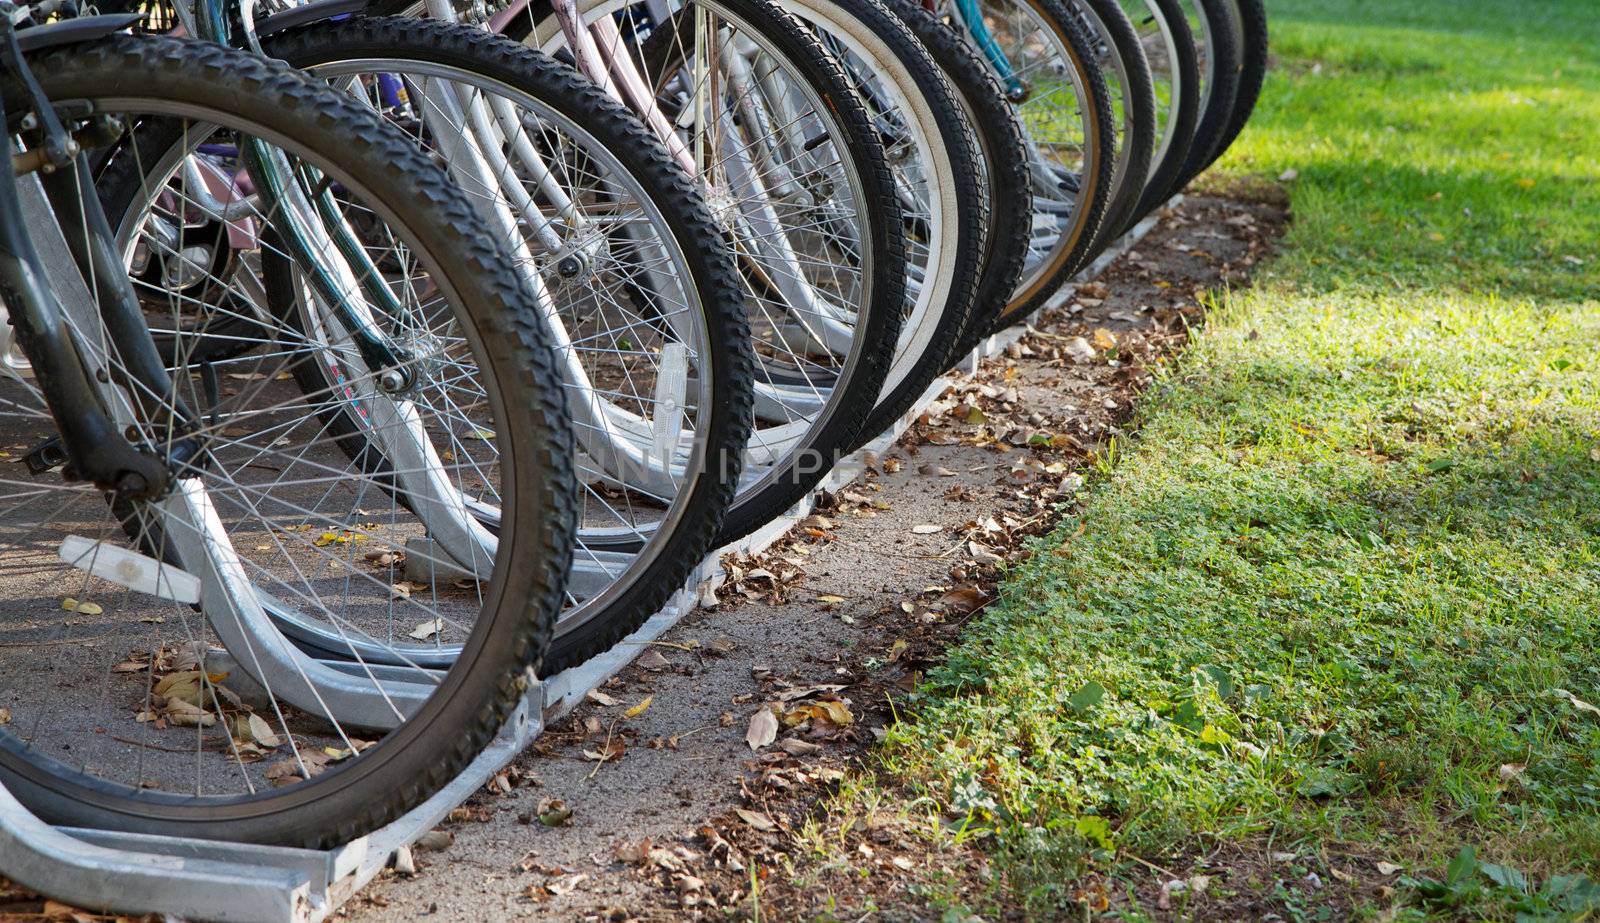 Row of bicycle tires in a raco with green grass